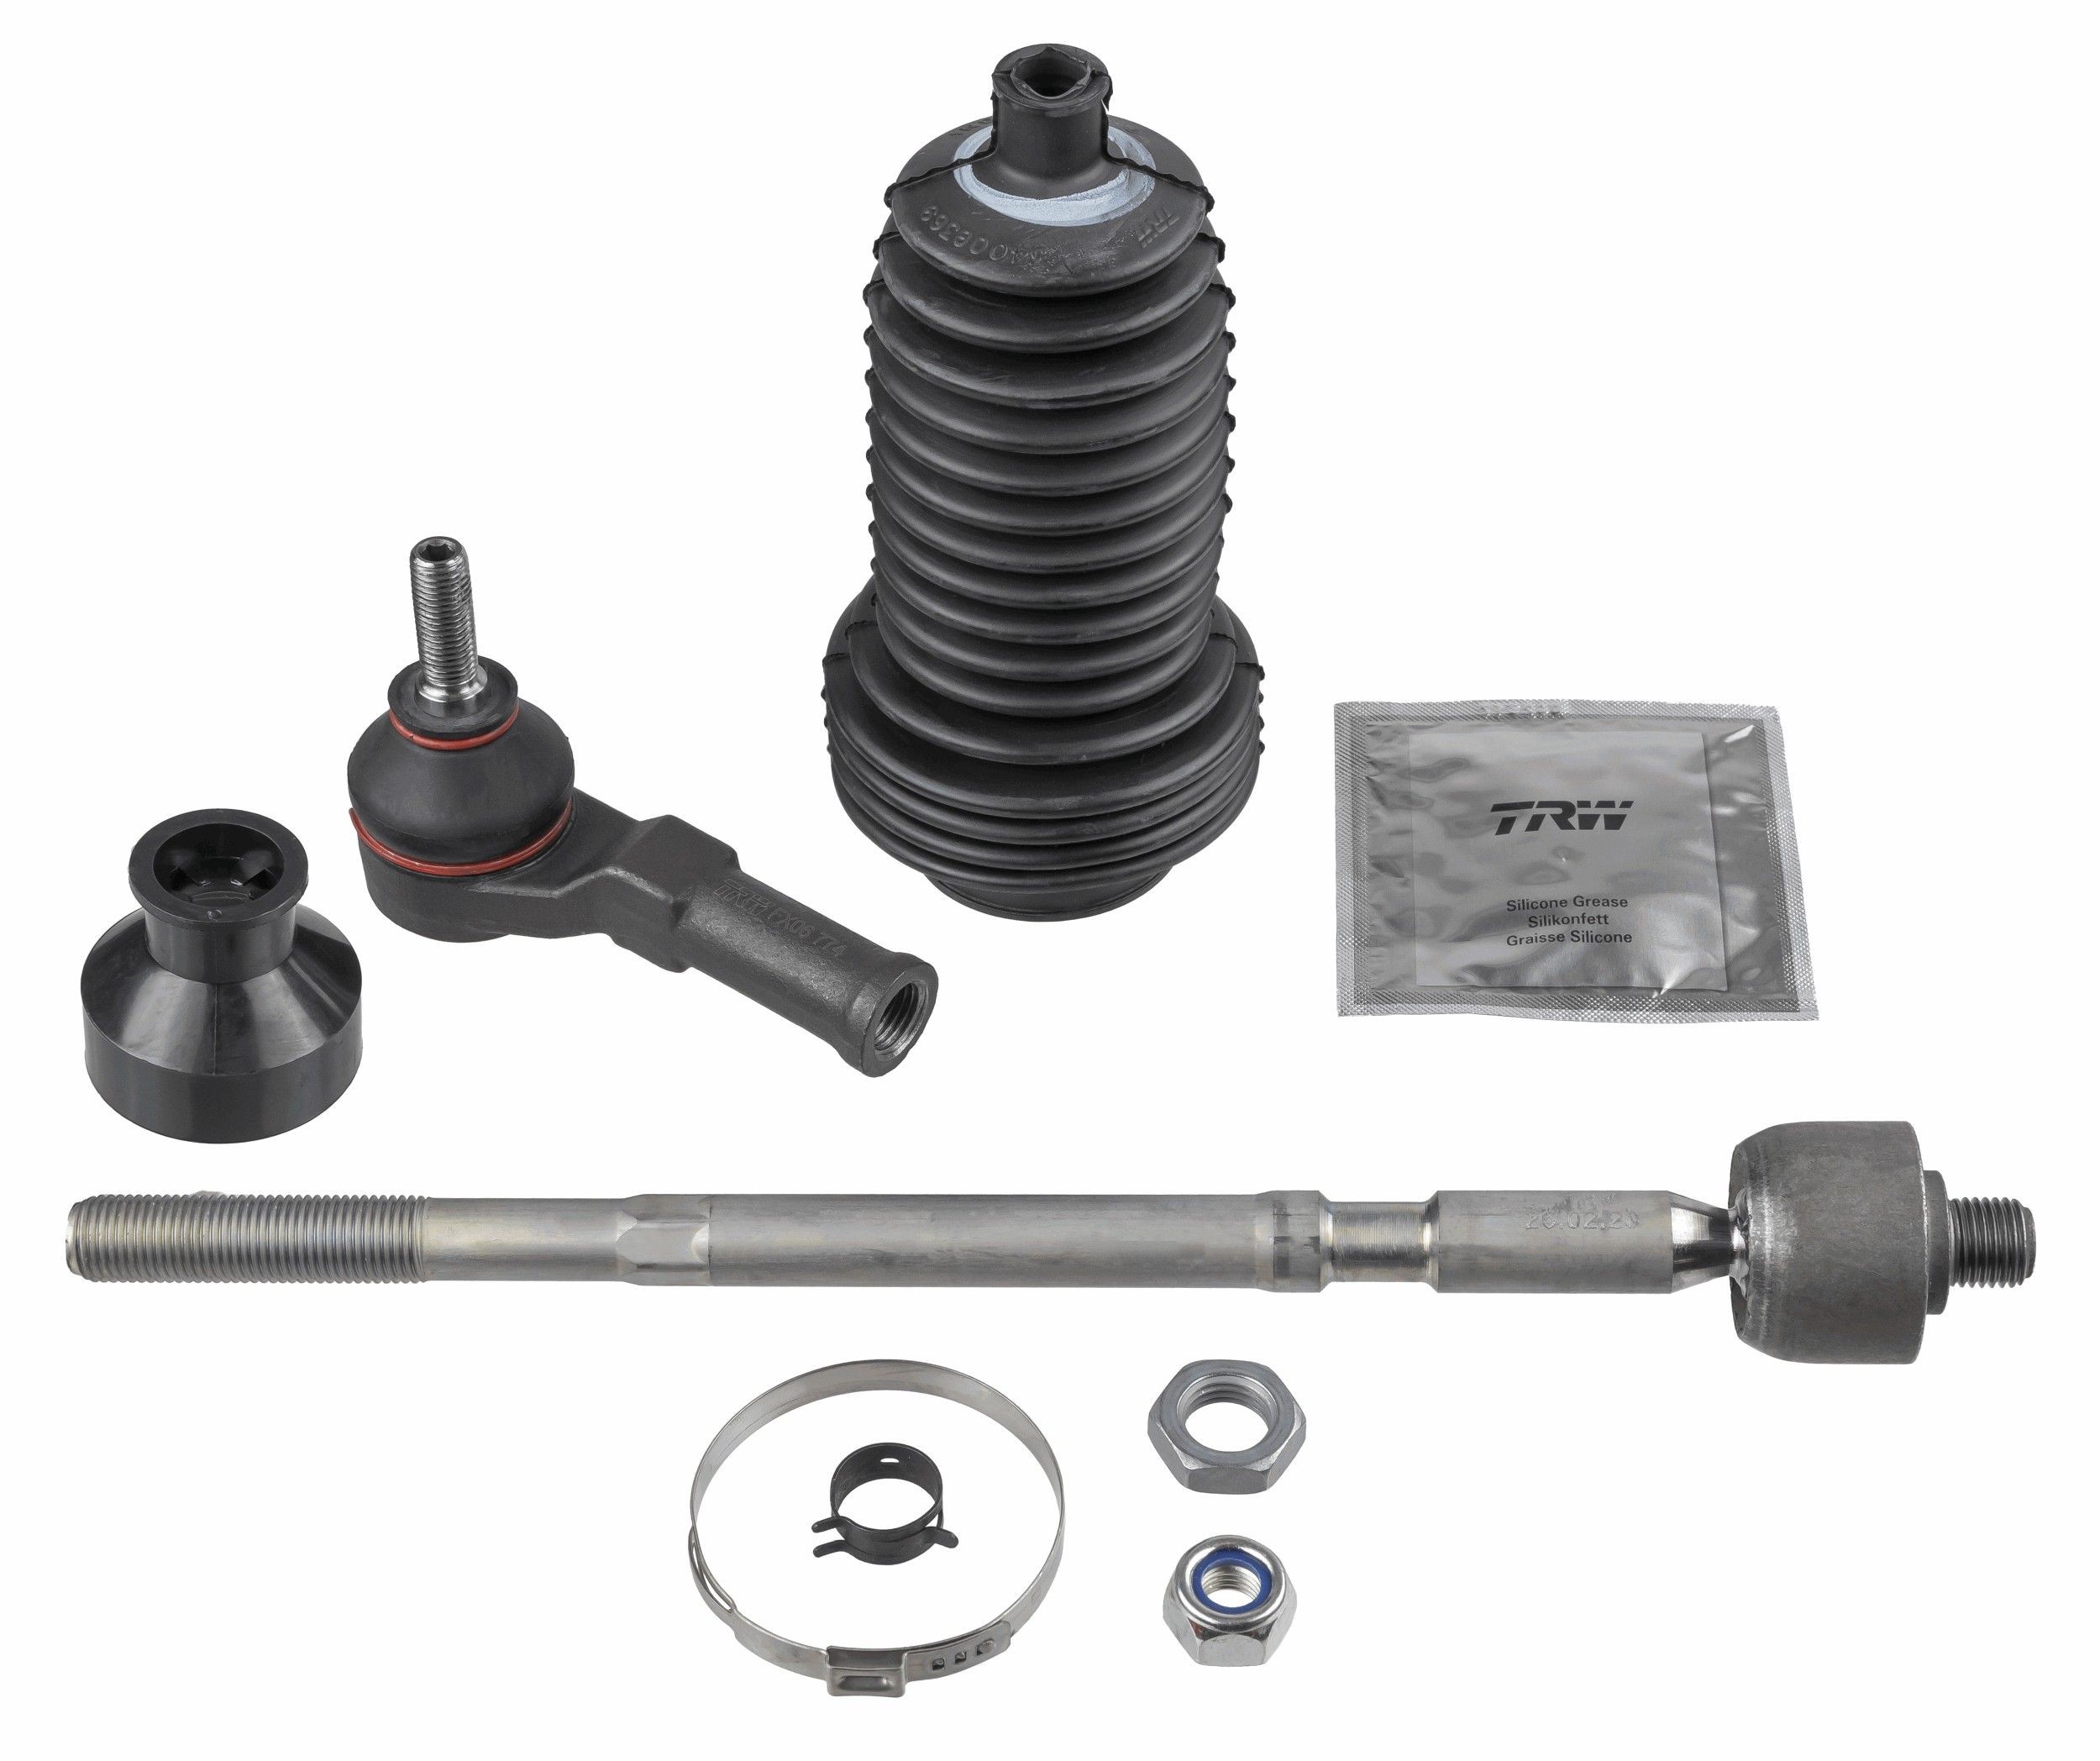 LEMFÖRDER 38460 01 Rod Assembly with accessories